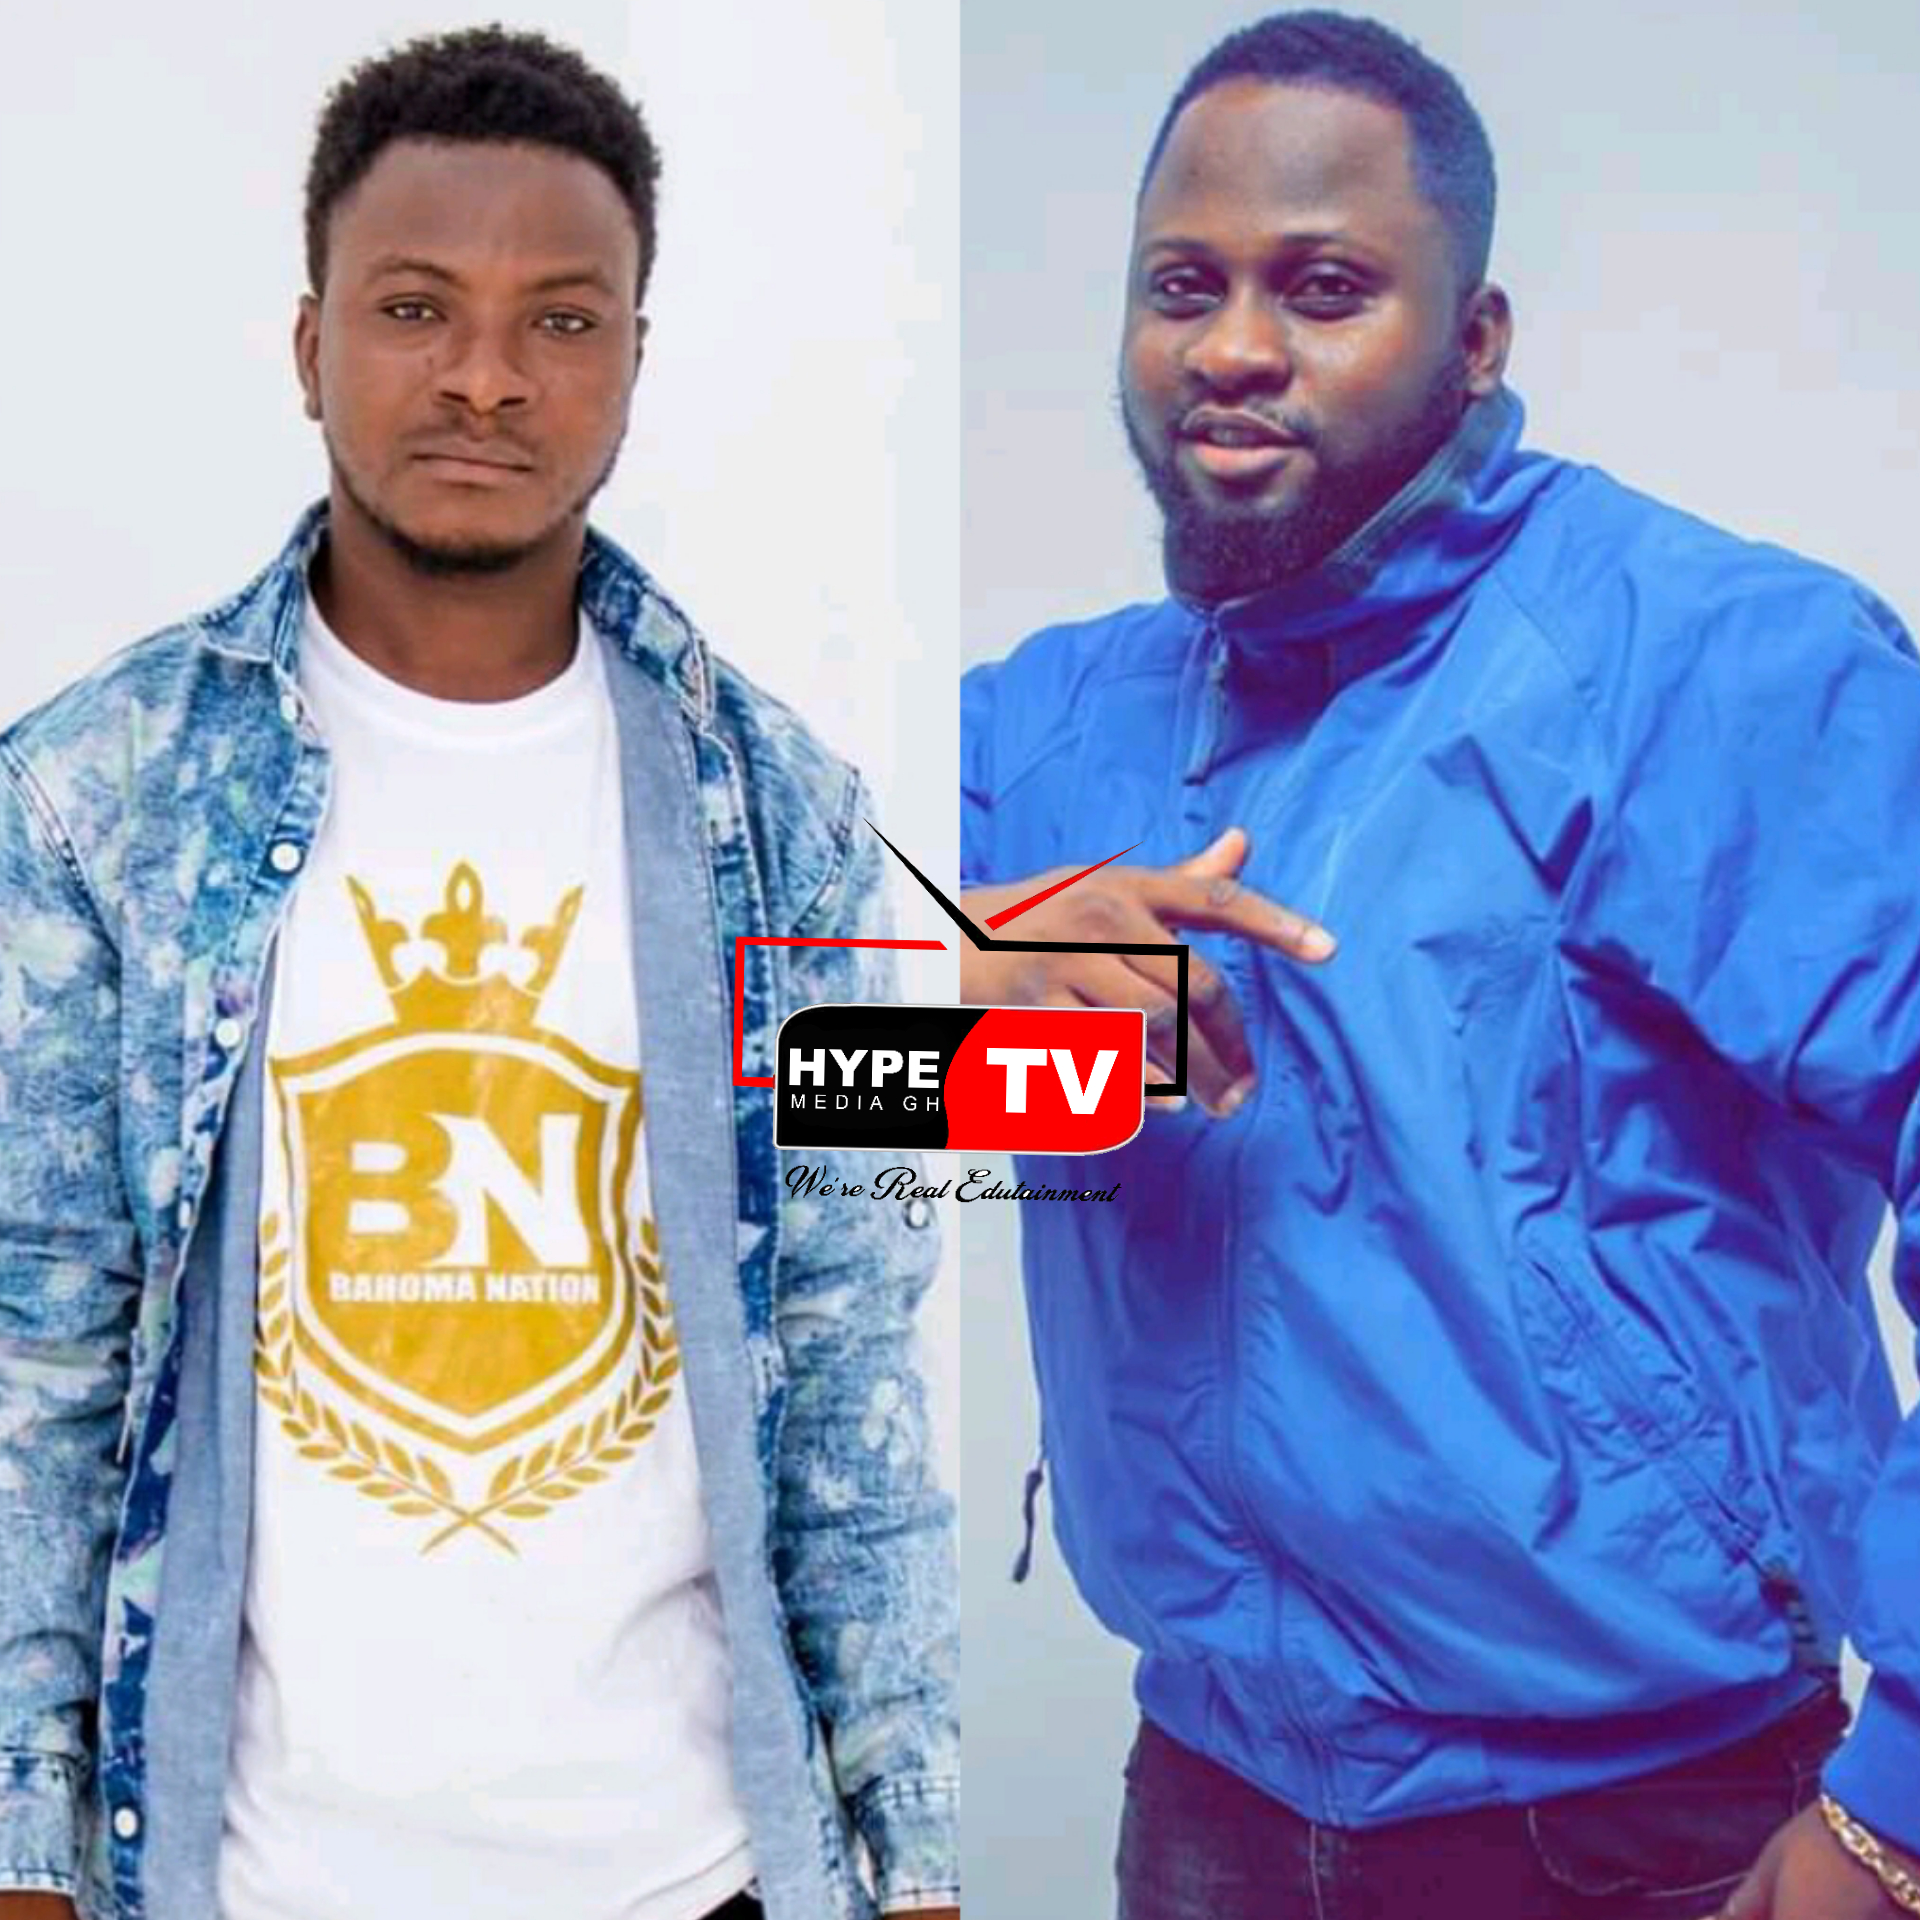 Shaban Claps For Dobble Tee After The Rapper Lashes His Father